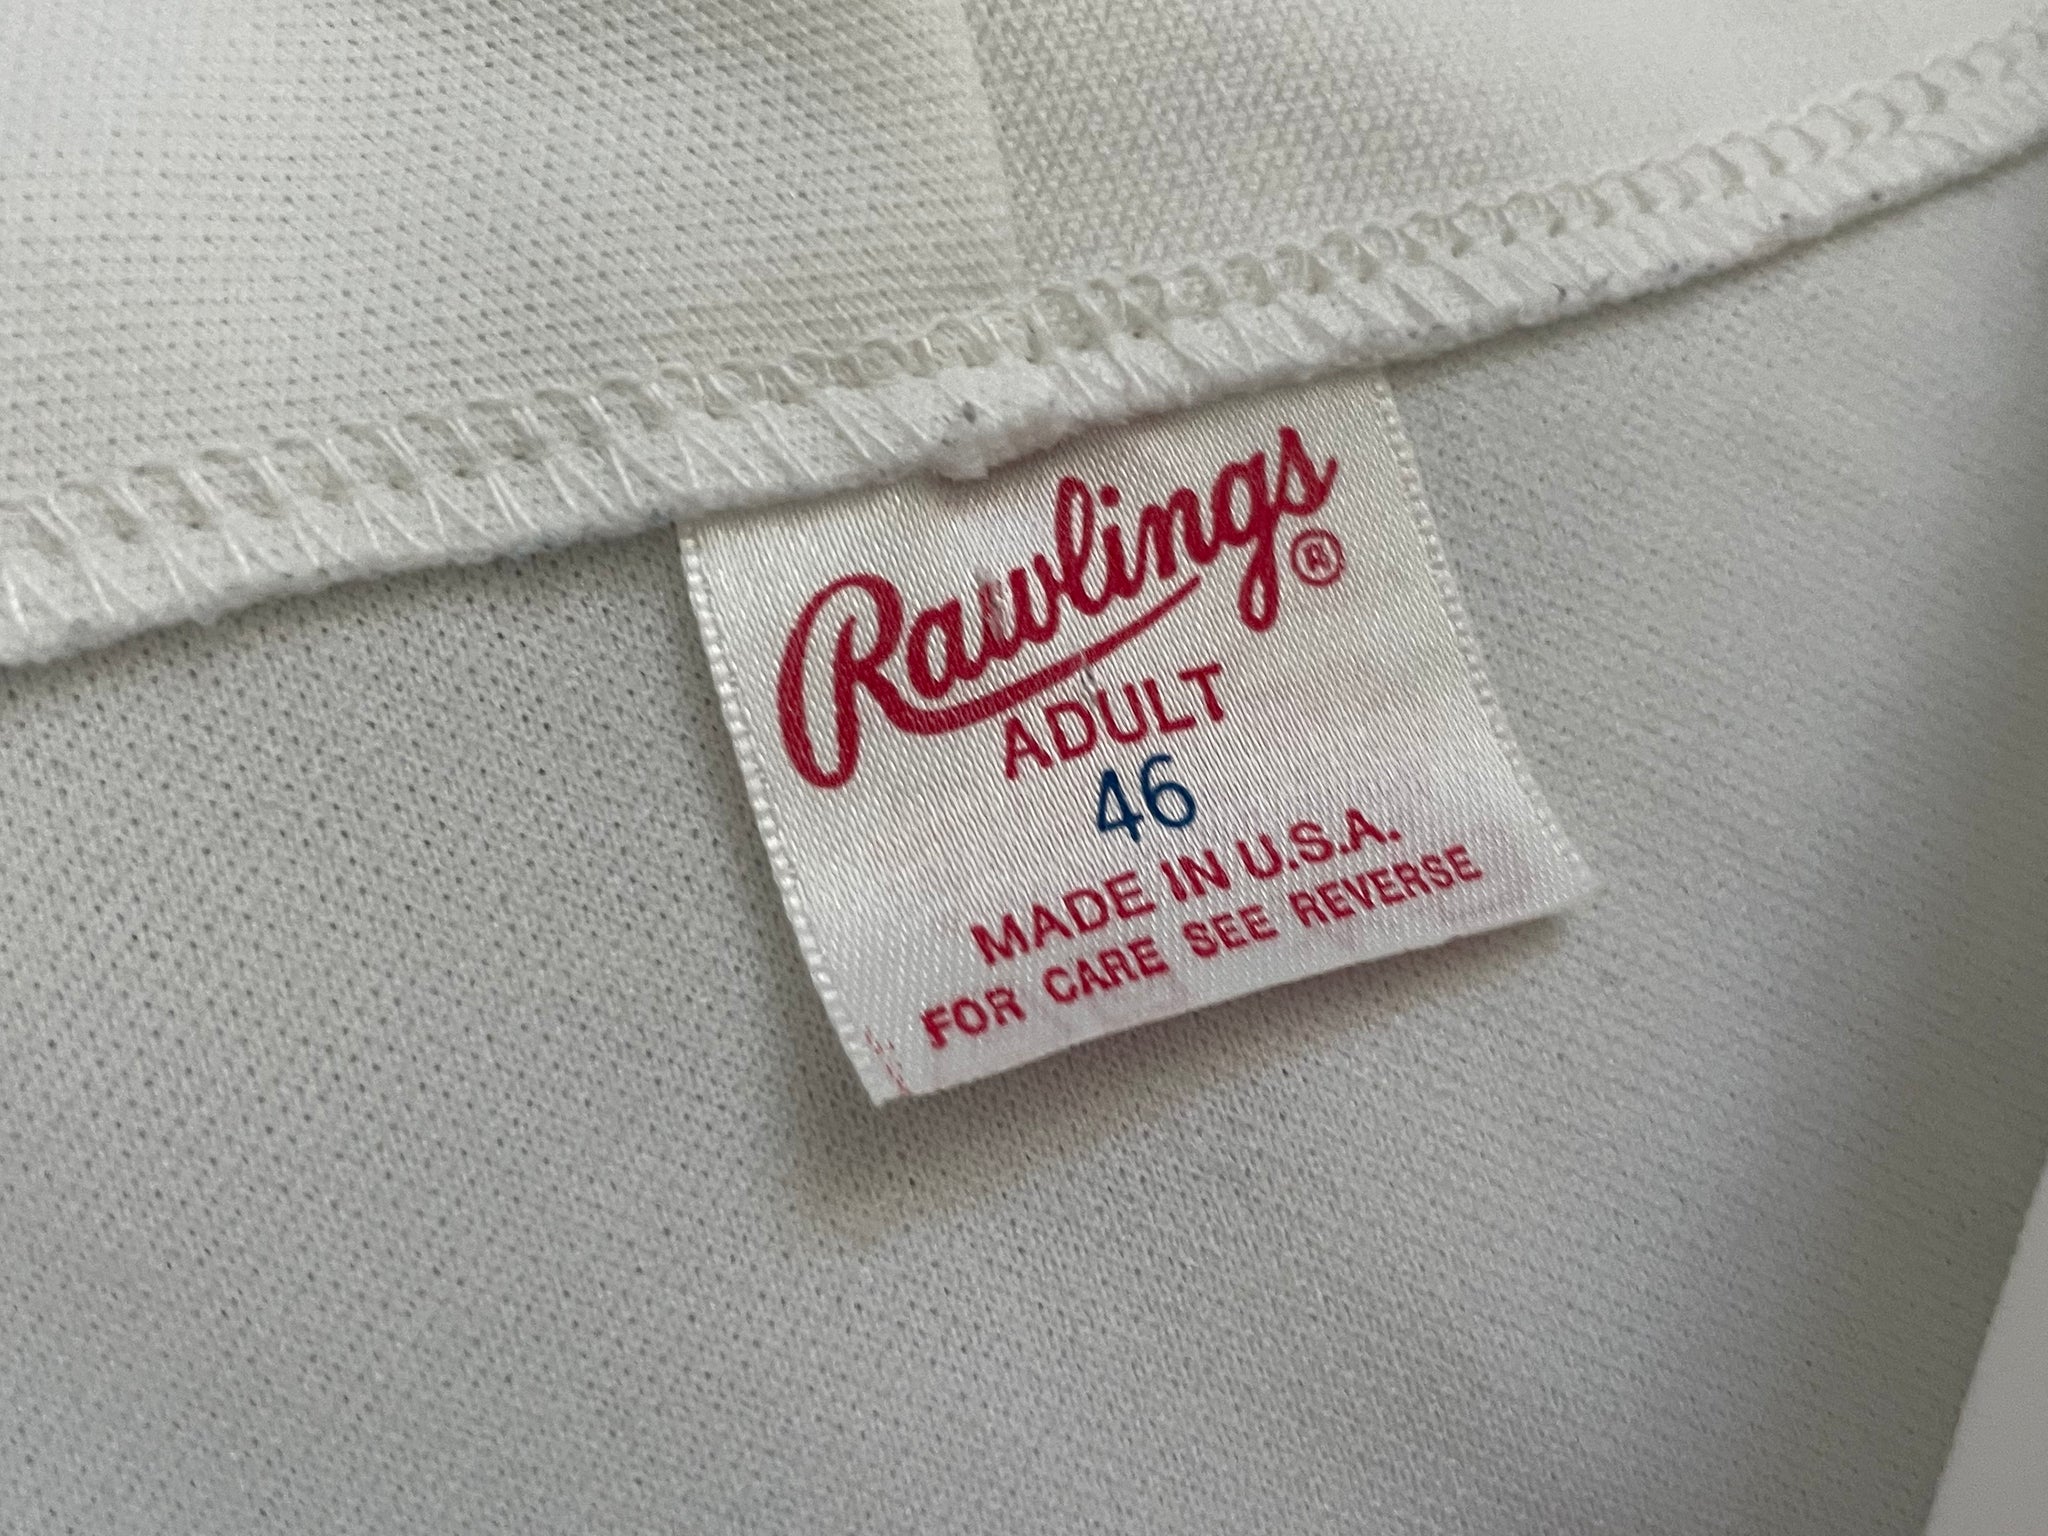 Rawlings, Shirts, Vintage Rowlings Dodgers Jersey